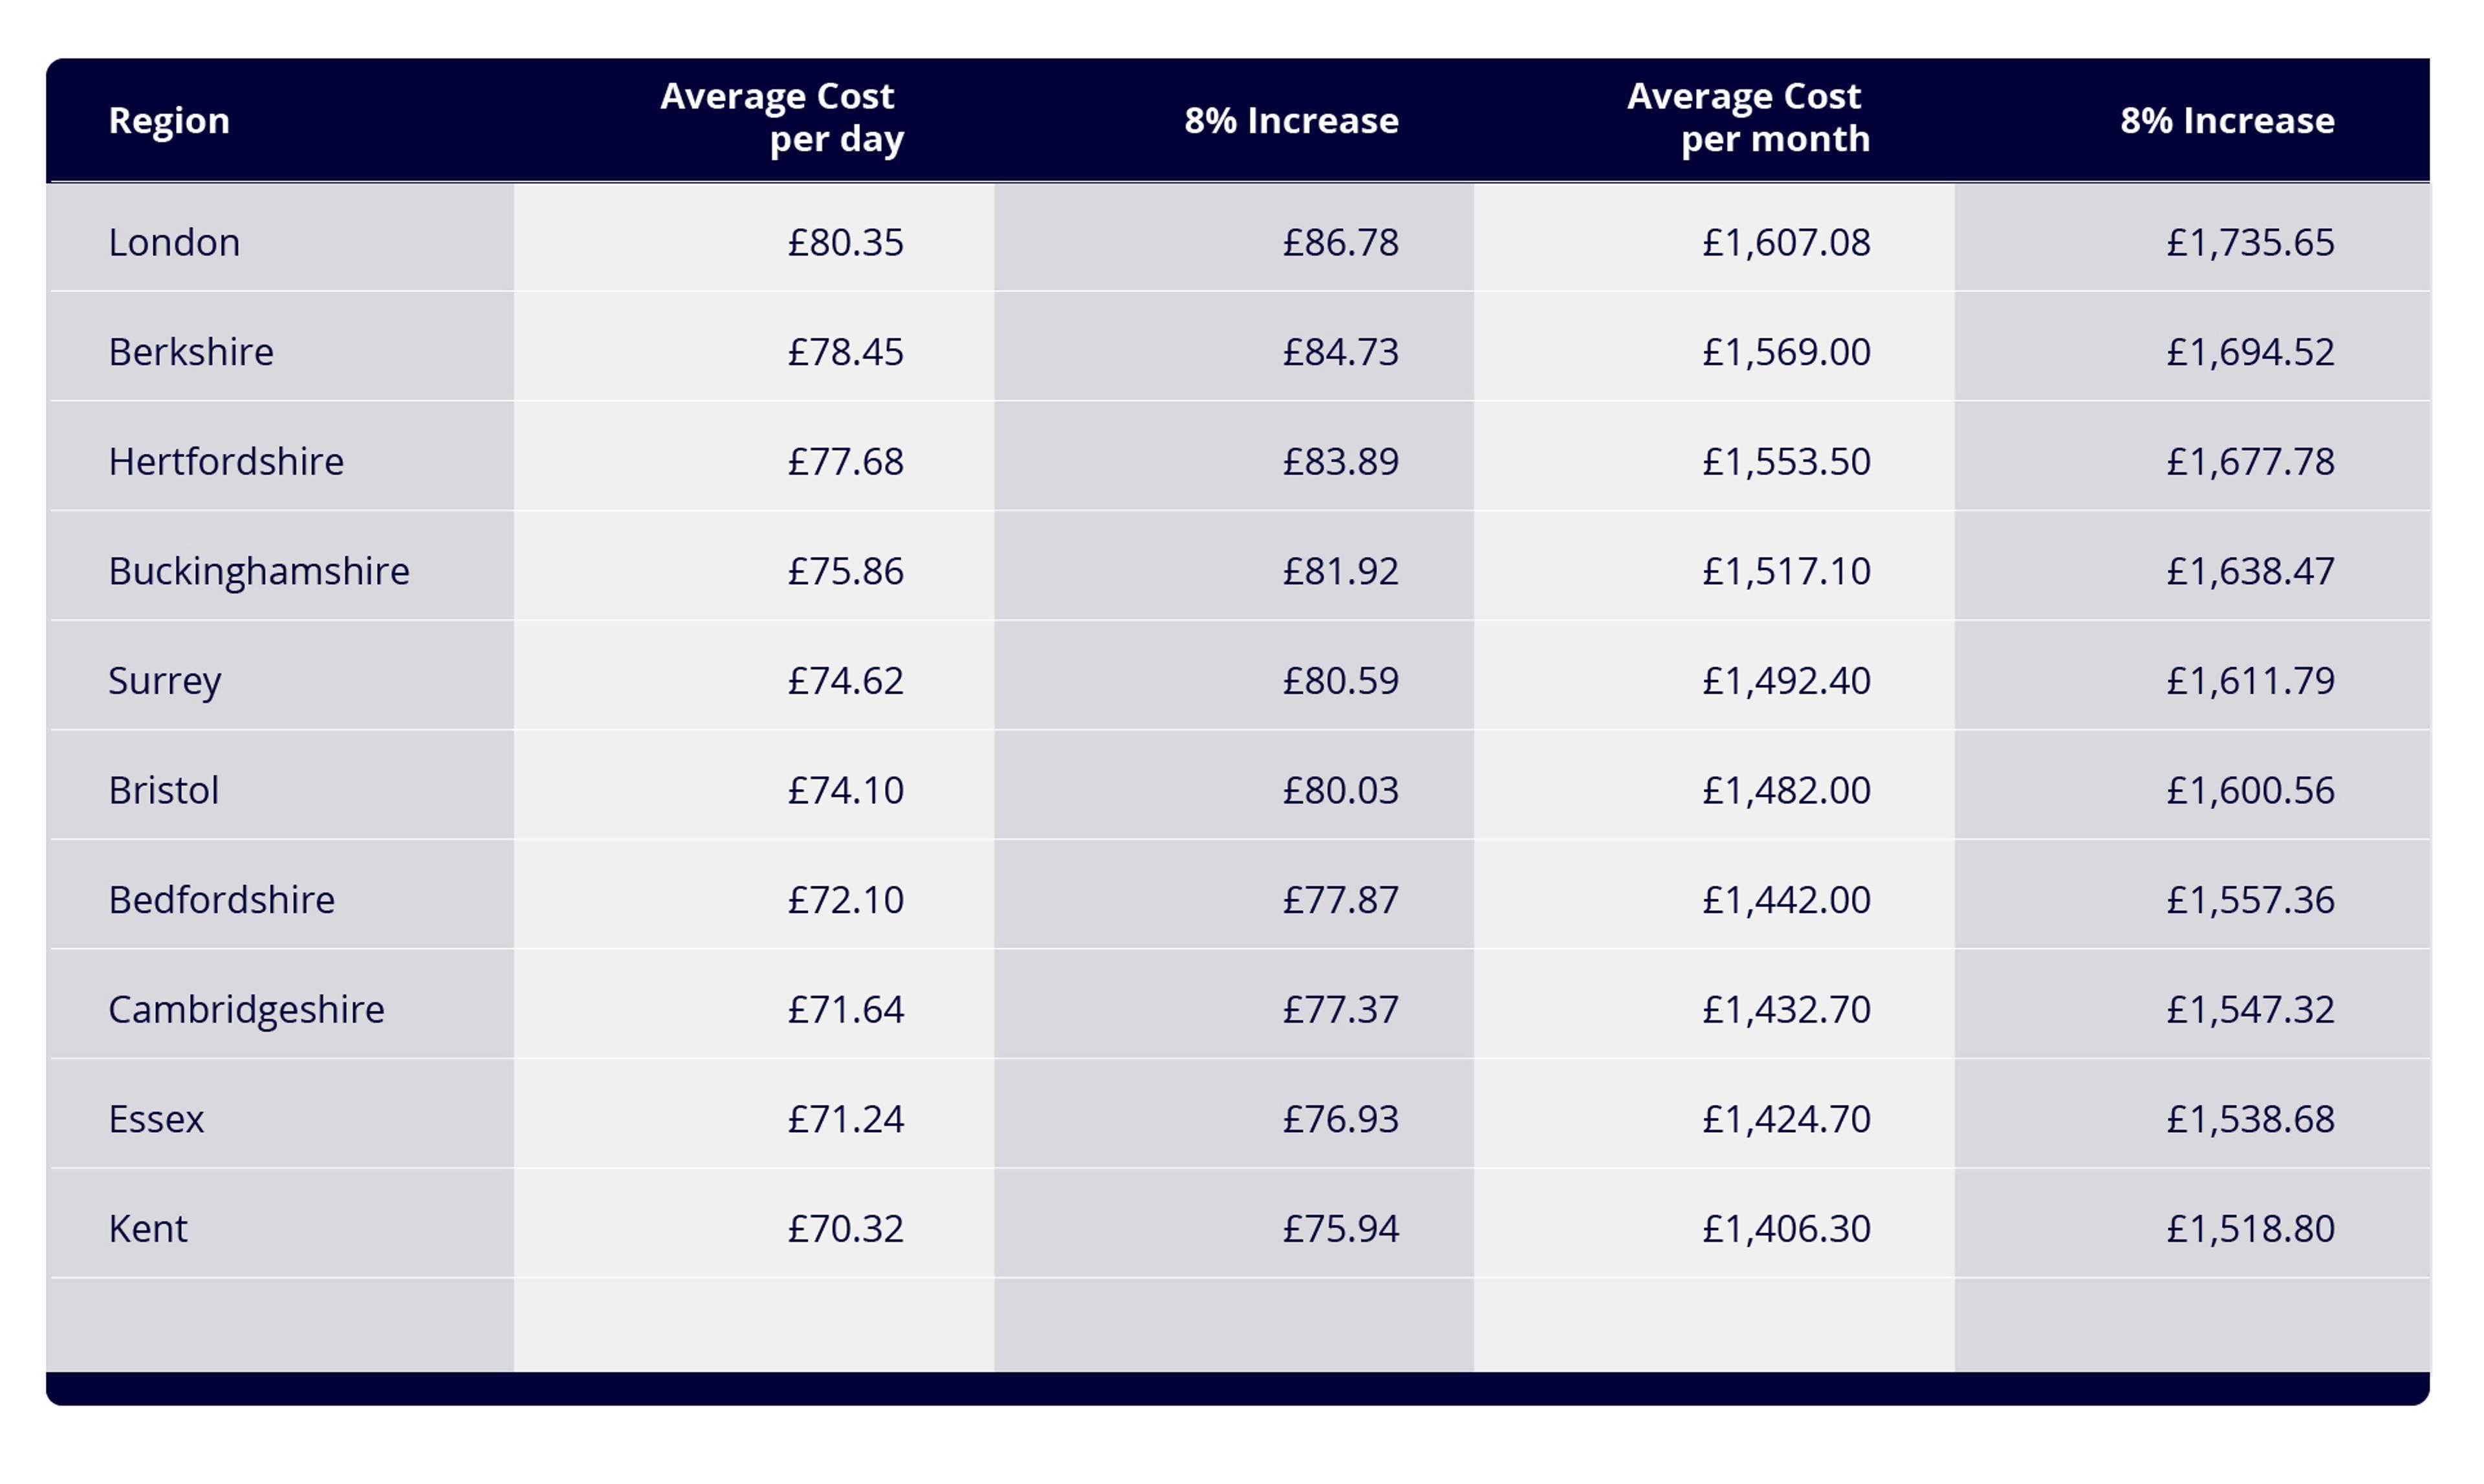 A table showing the Top 10 Most Expensive Childcare Regions